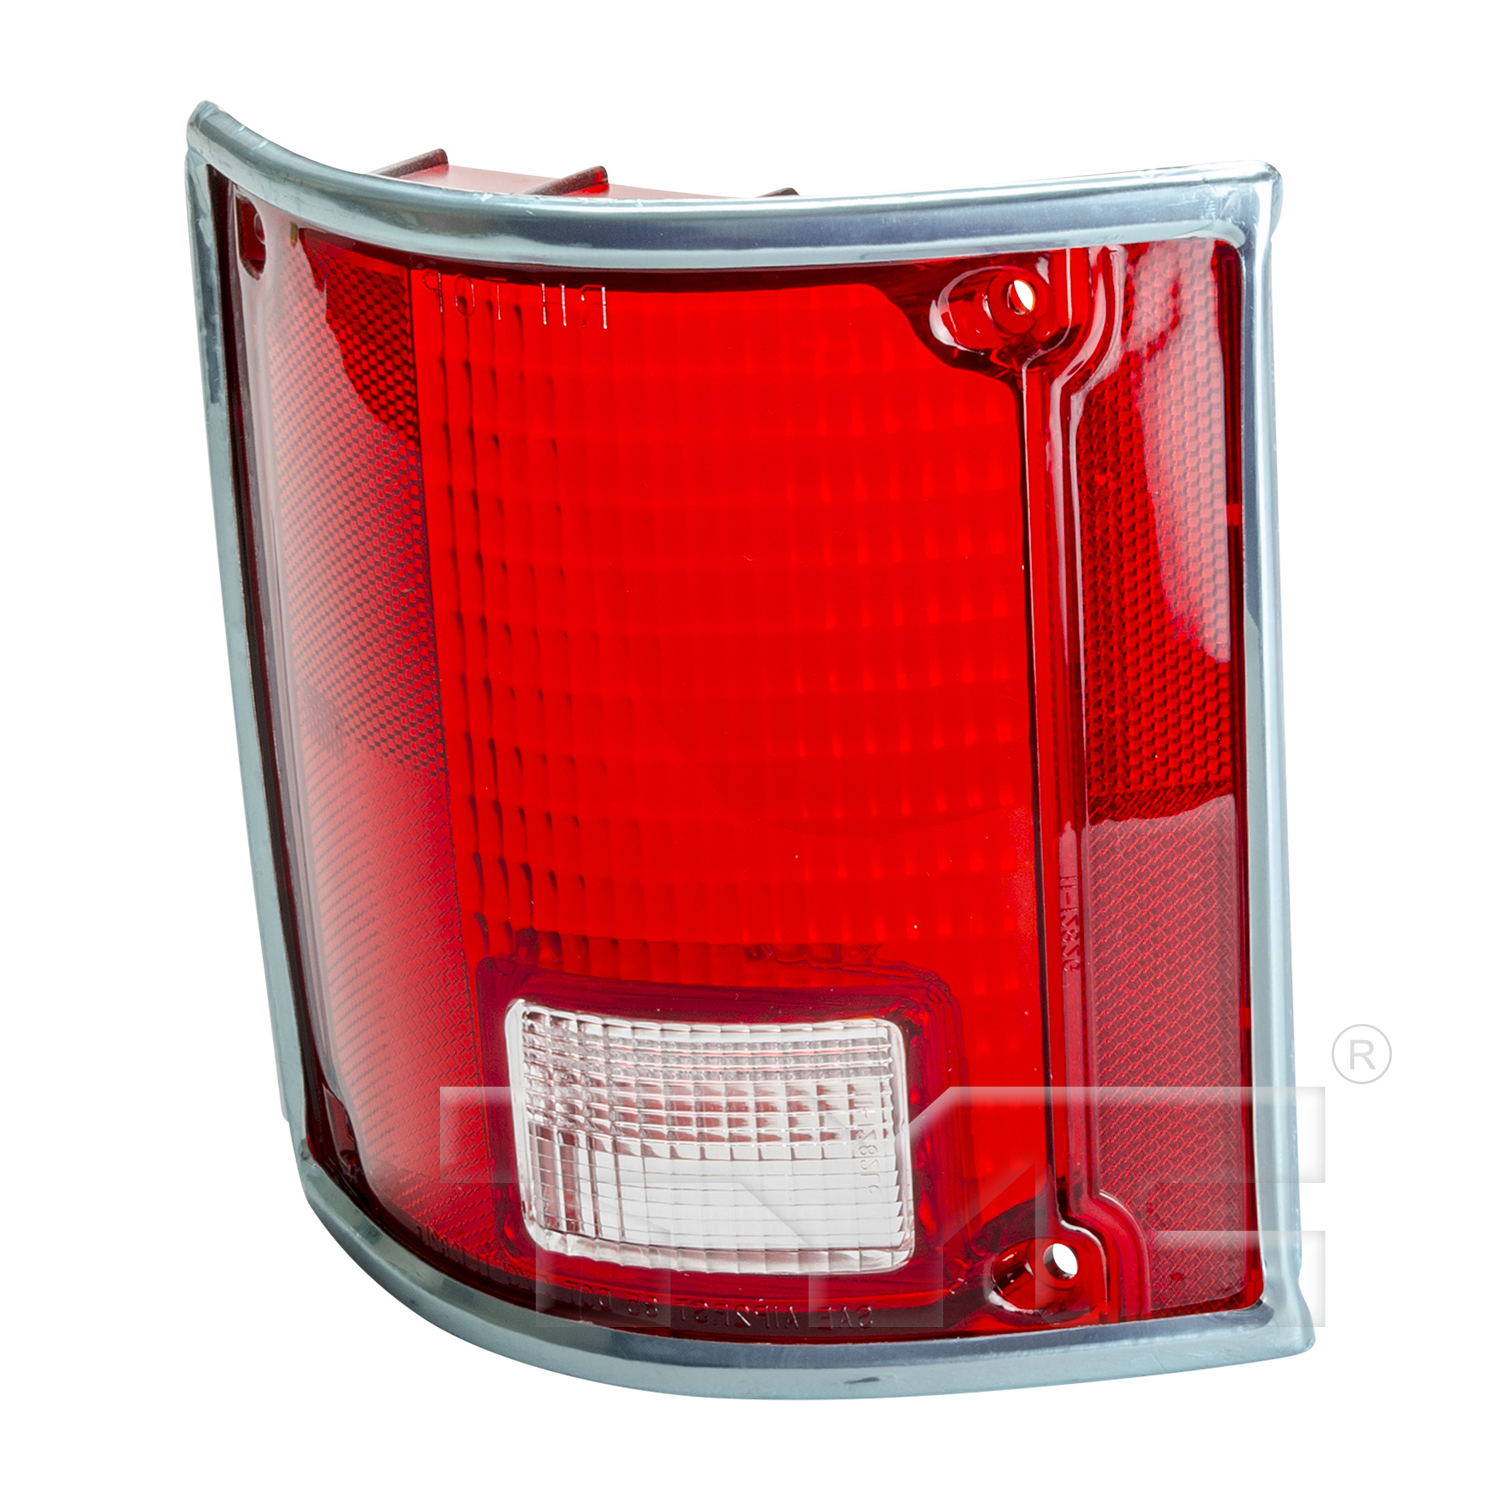 Aftermarket TAILLIGHTS for CHEVROLET - C10 SUBURBAN, C10 SUBURBAN,73-86,LT Taillamp lens